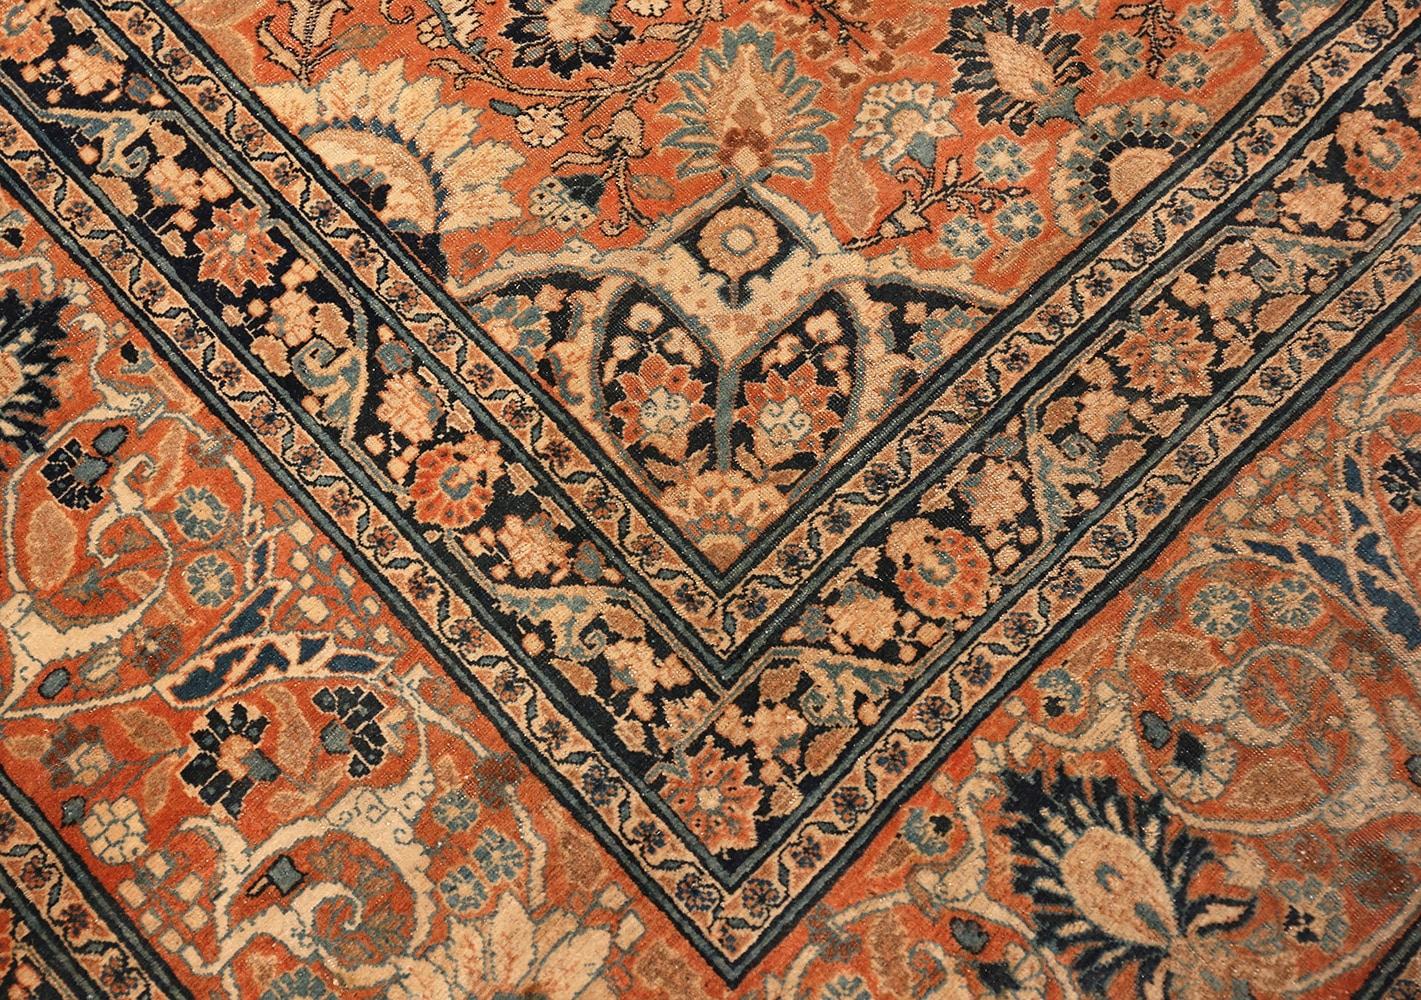 Antique Persian Tabriz Rug, Country of Origin / Rug Type: Persian Rugs, Circa Date: 1880. Size: 12 ft 6 in x 17 ft 10 in (3.81 m x 5.44 m)

